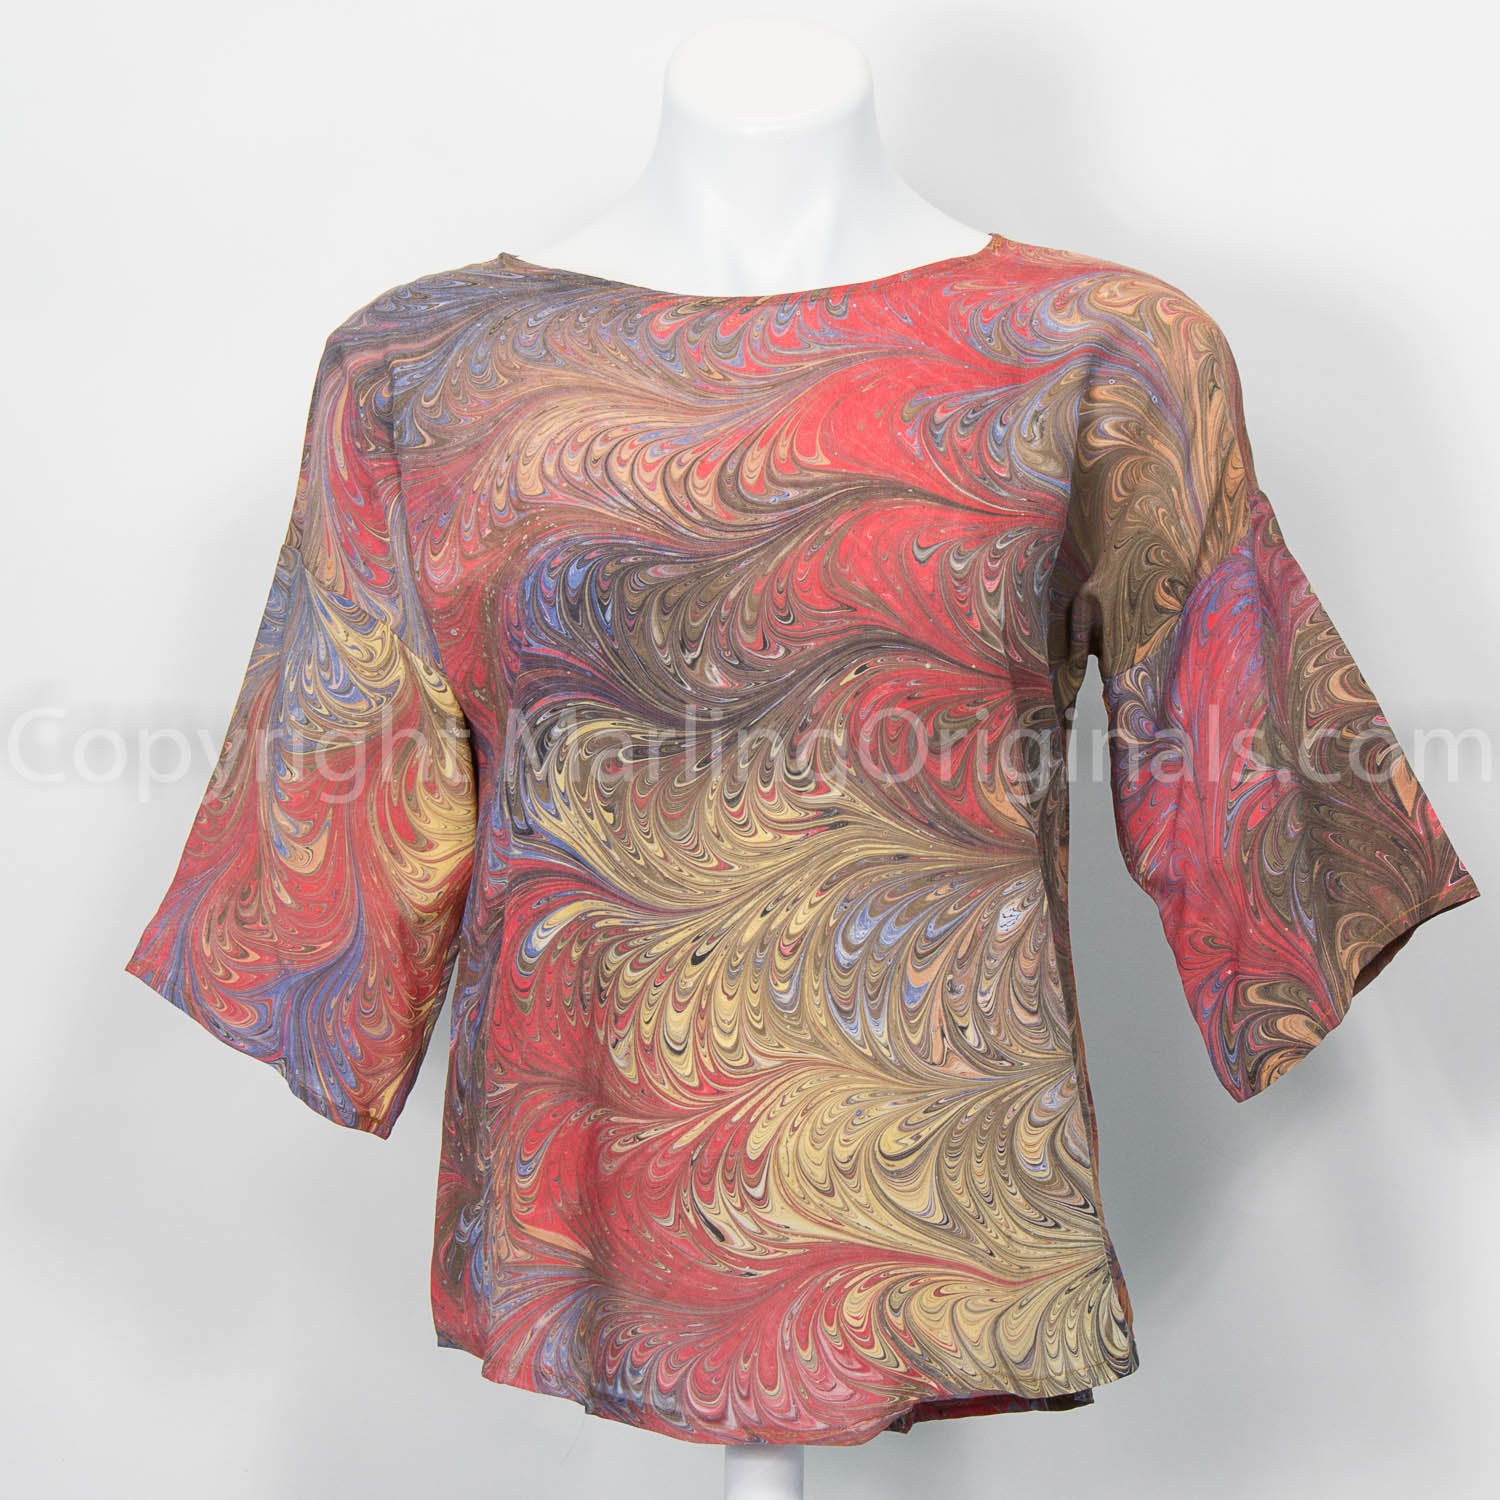 Silk top in warm brown and golden tones marbled with red accents.  Round neck with half sleeve.